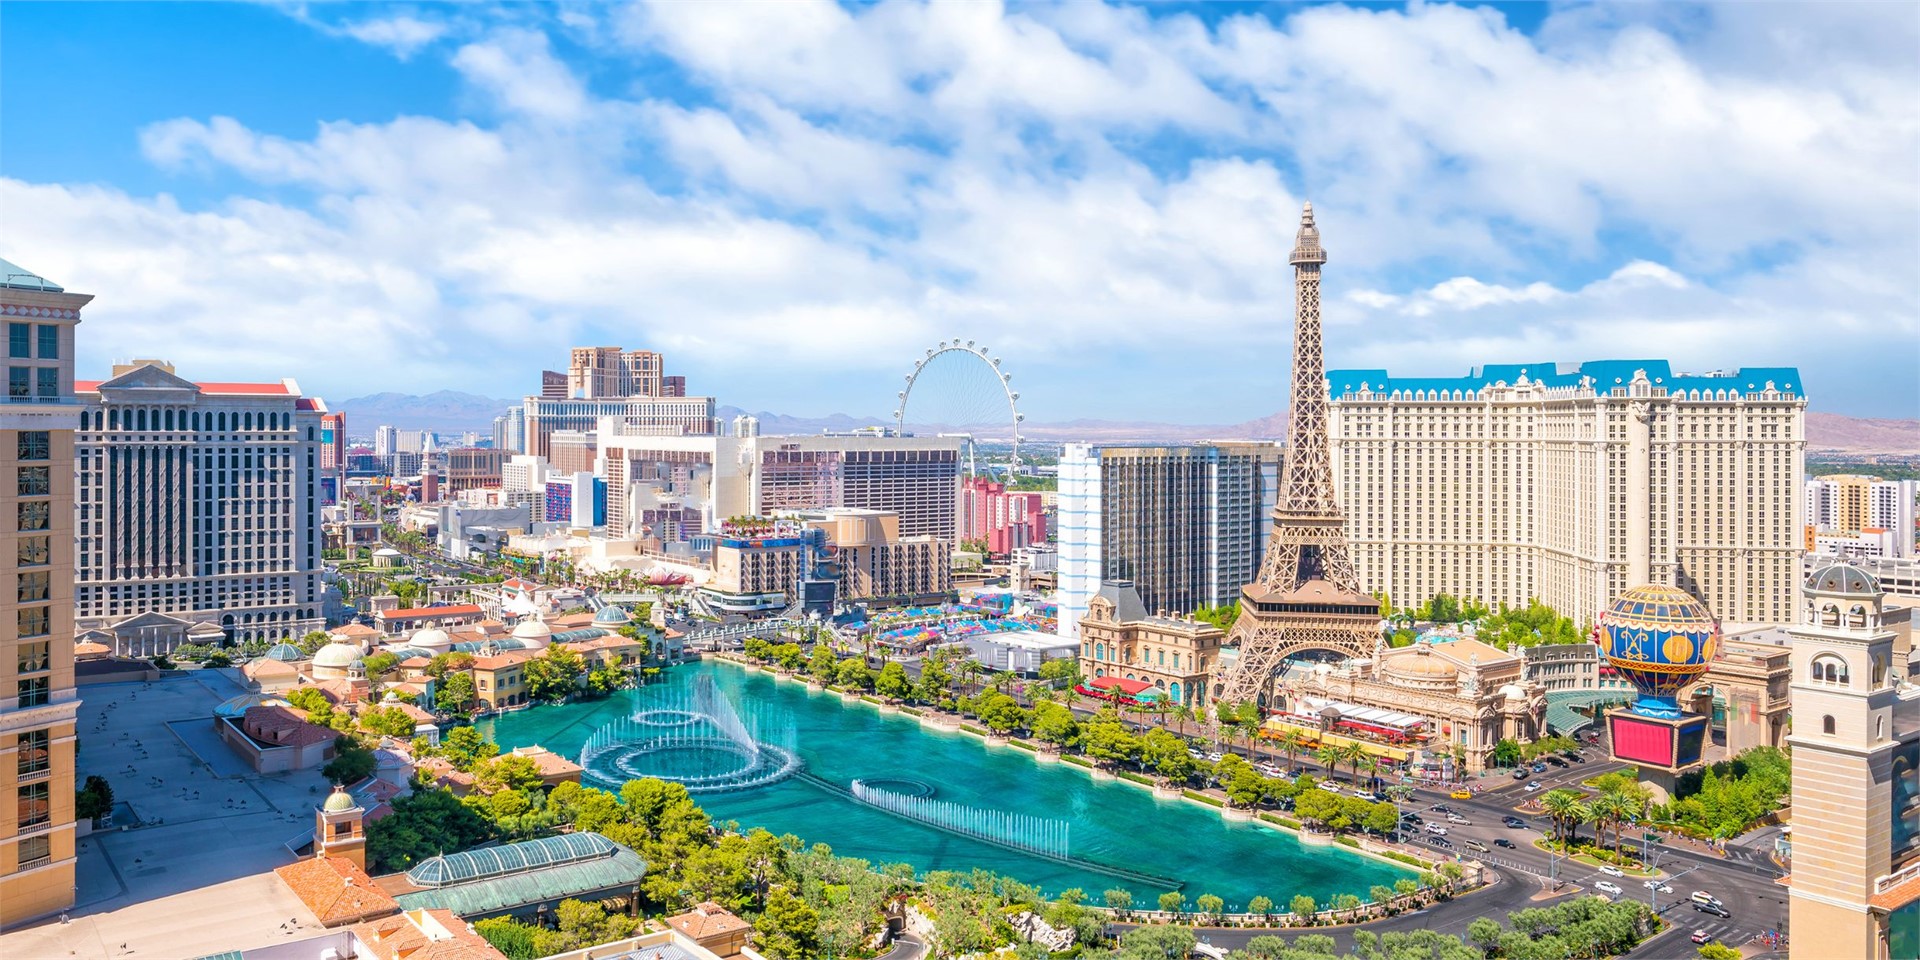 Hotels and accommodation in Las Vegas, USA
